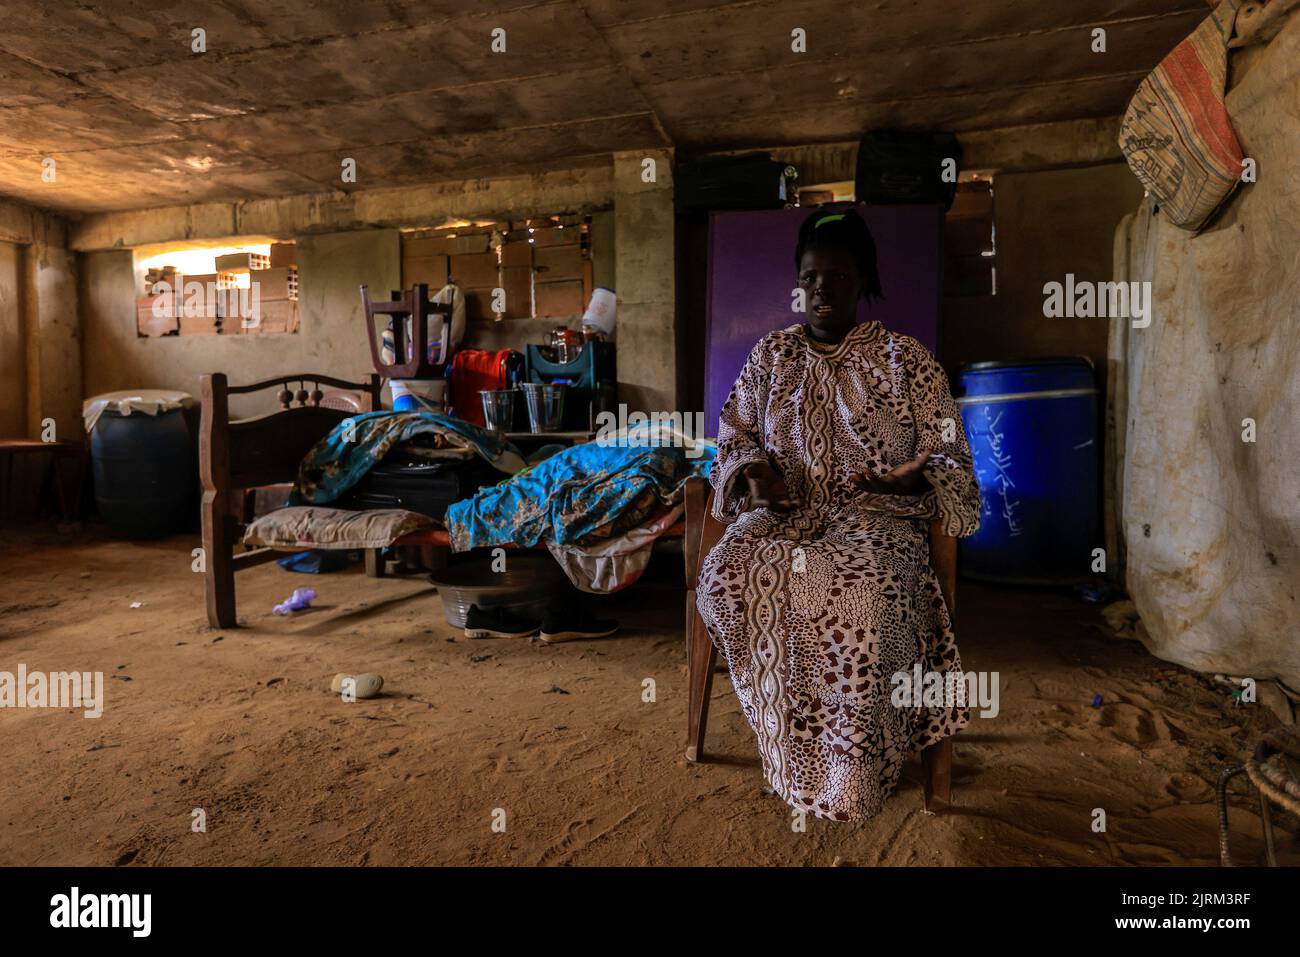 South Sudanese Alissa Deng, who returned to Khartoum after the 2011 secession, looks on during an interview with Reuters at a makeshift shelter in an abandoned plot of land, in Bahri, Sudan, August 7, 2022. REUTERS/Mohamed Nureldin Abdallah Stock Photo